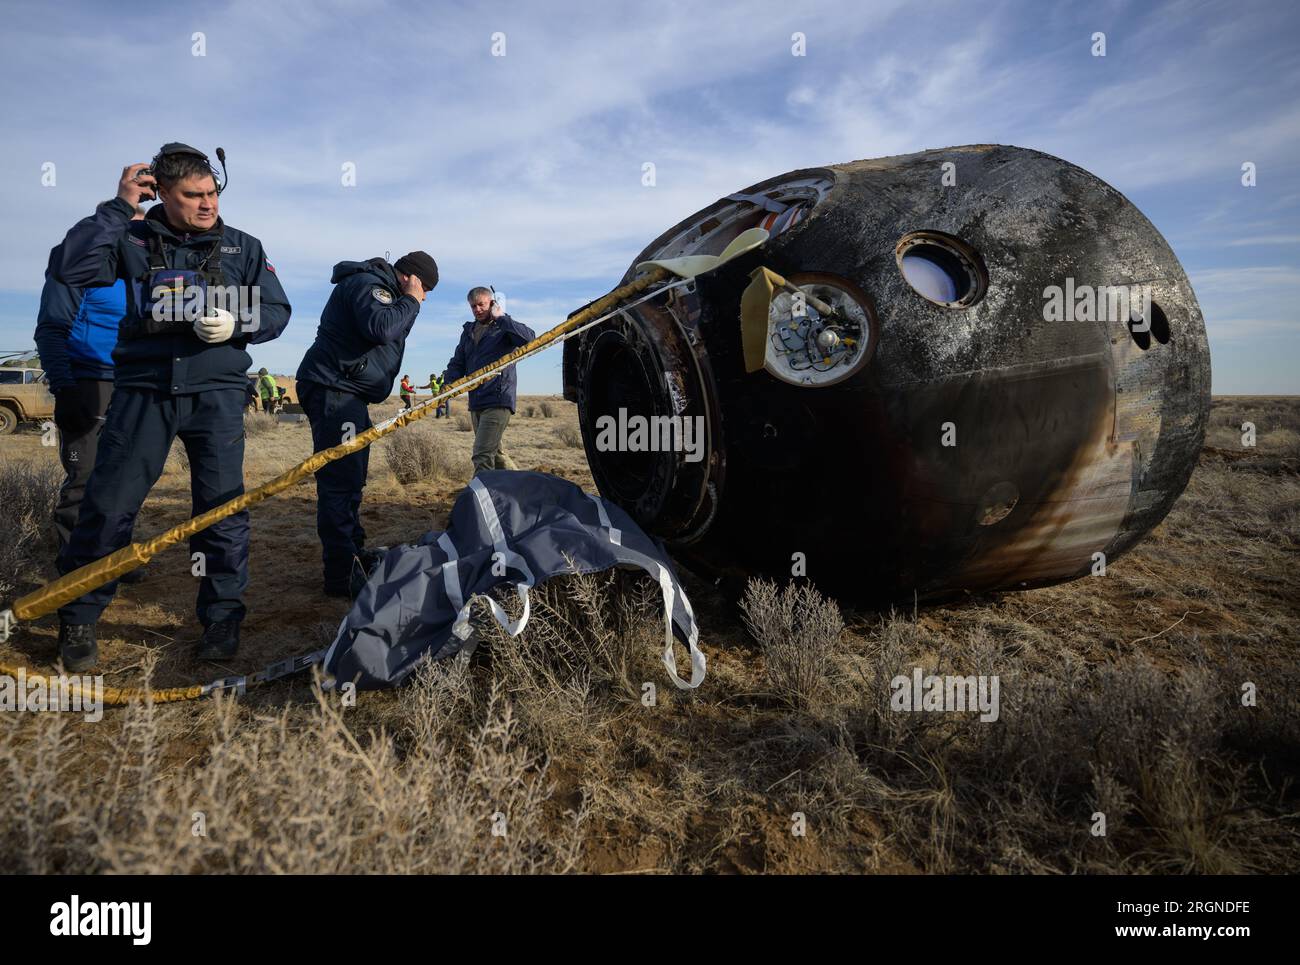 Reportage: Expedition 66 Soyuz Landing (March 2022) - Russian Search and Rescue teams arrive at the Soyuz MS-19 spacecraft shortly after it landed in a remote area near the town of Zhezkazgan, Kazakhstan, Wednesday, March 30, 2022. Stock Photo